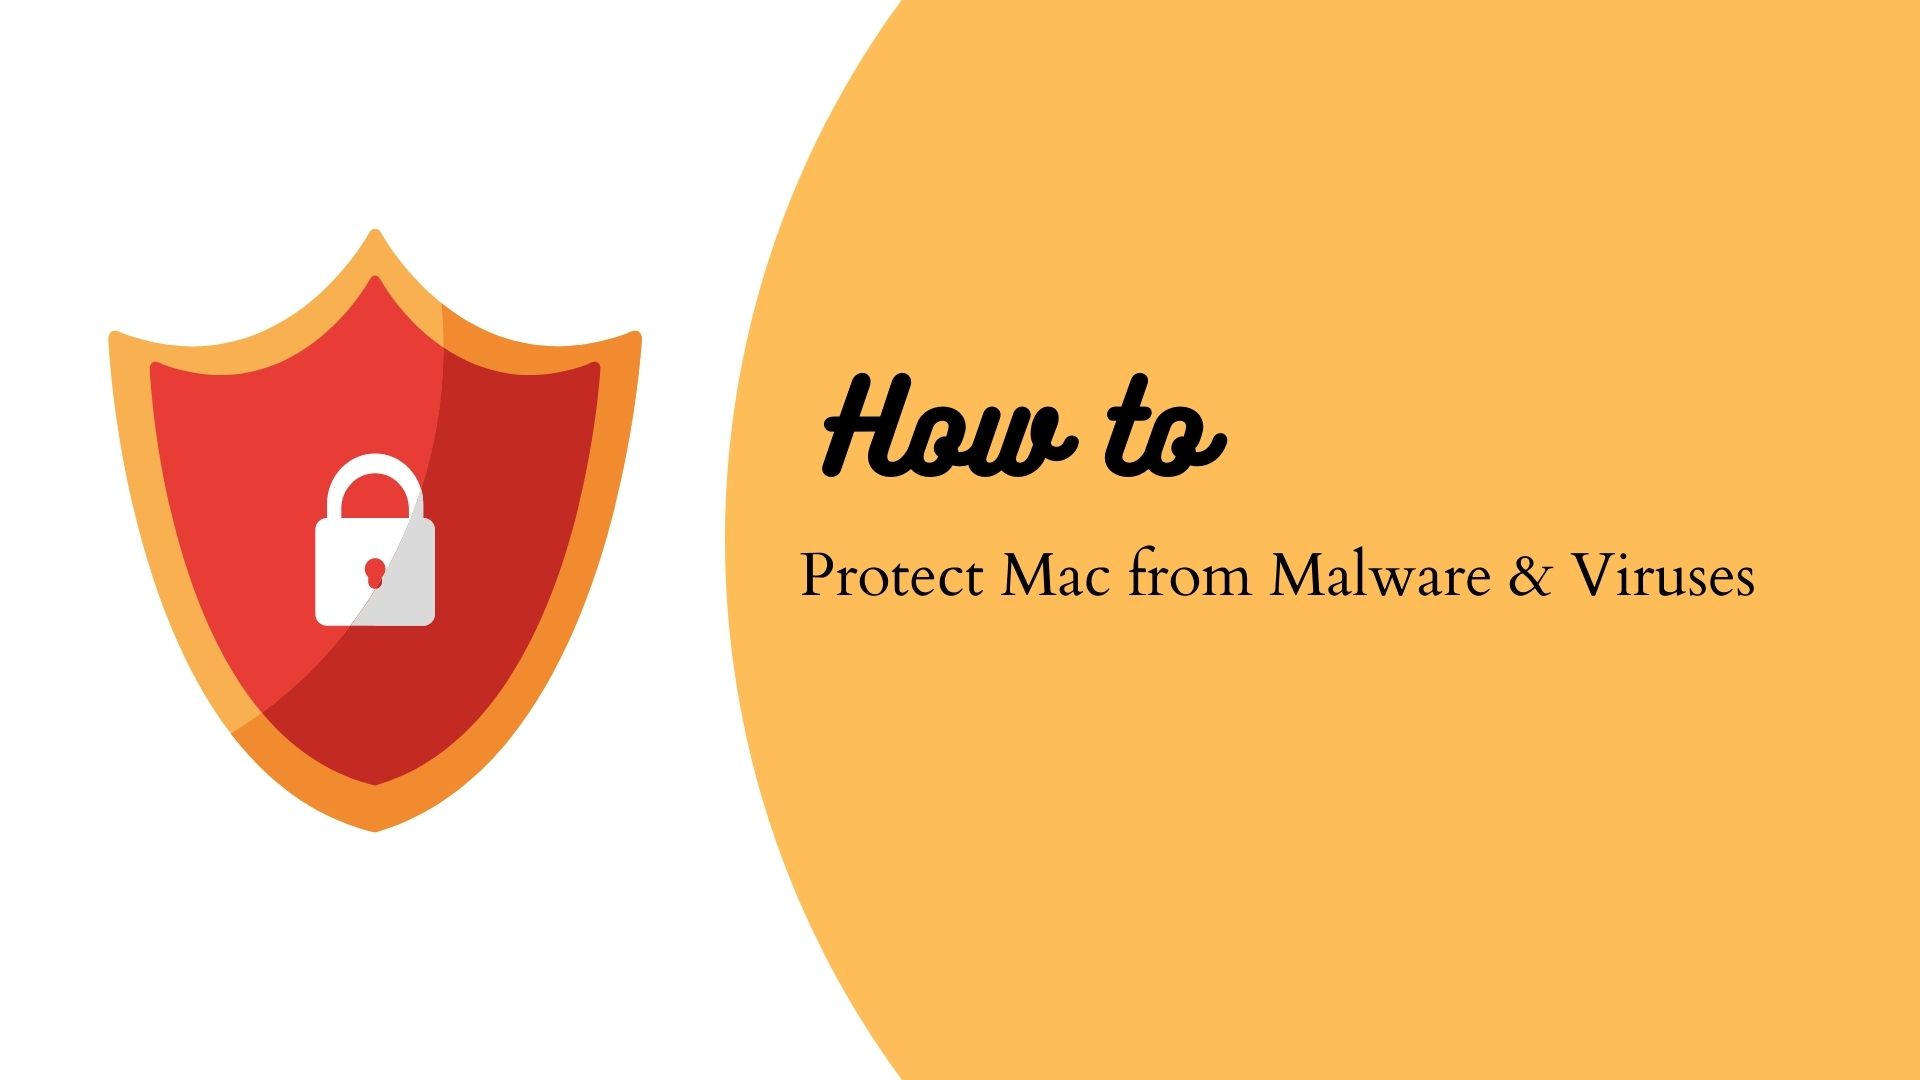 How to Protect Mac from Malware & Viruses